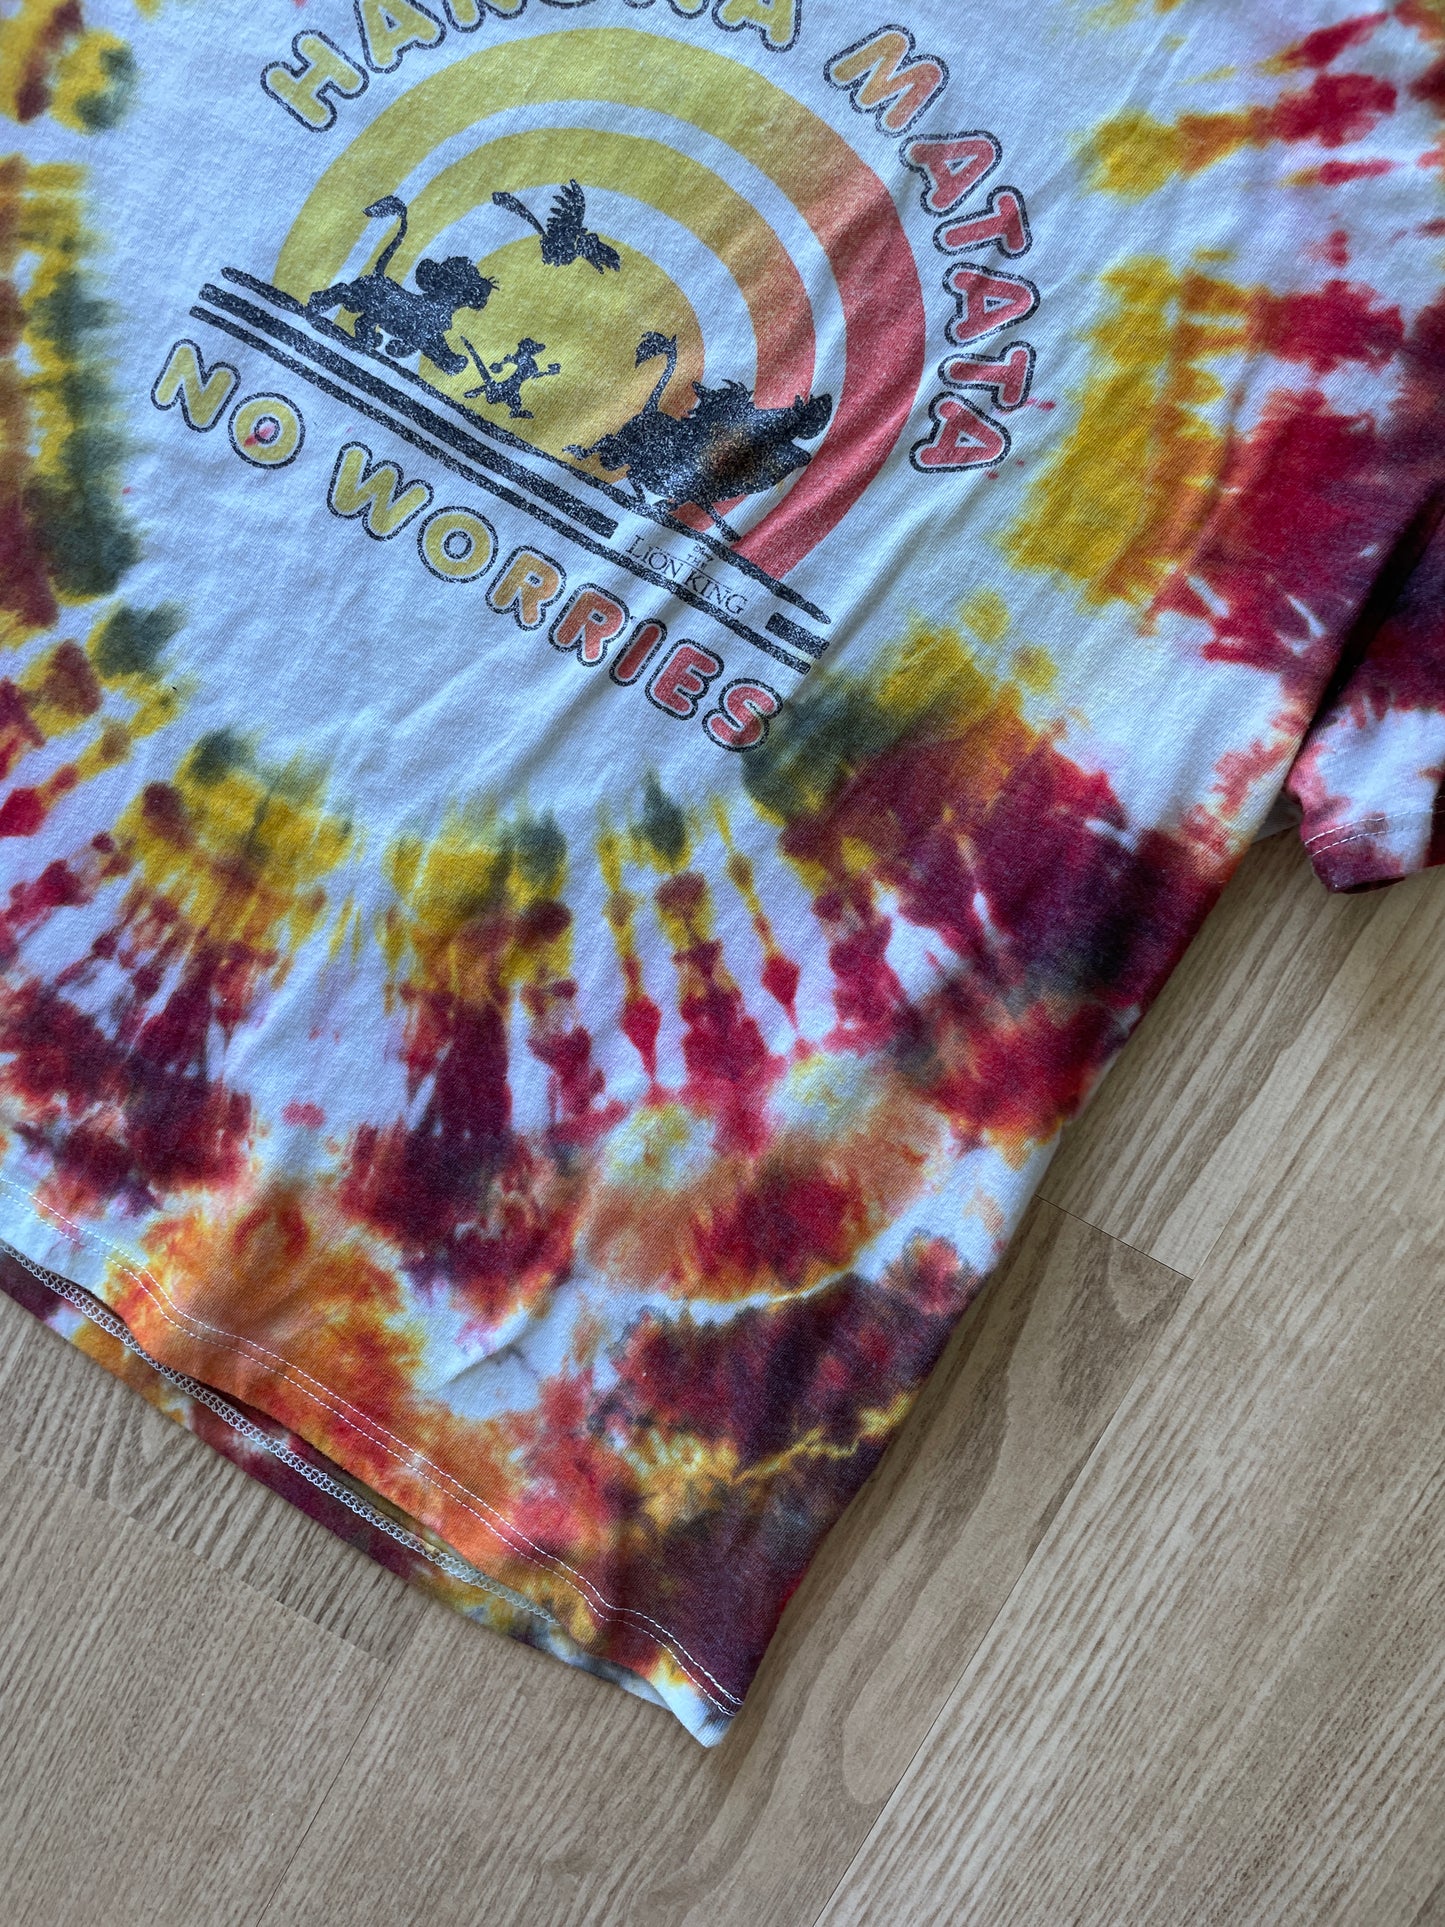 2XL Women’s Lion King Hakuna Matata Handmade Tie Dye T-Shirt | One-Of-a-Kind Red and Yellow Crumpled Short Sleeve